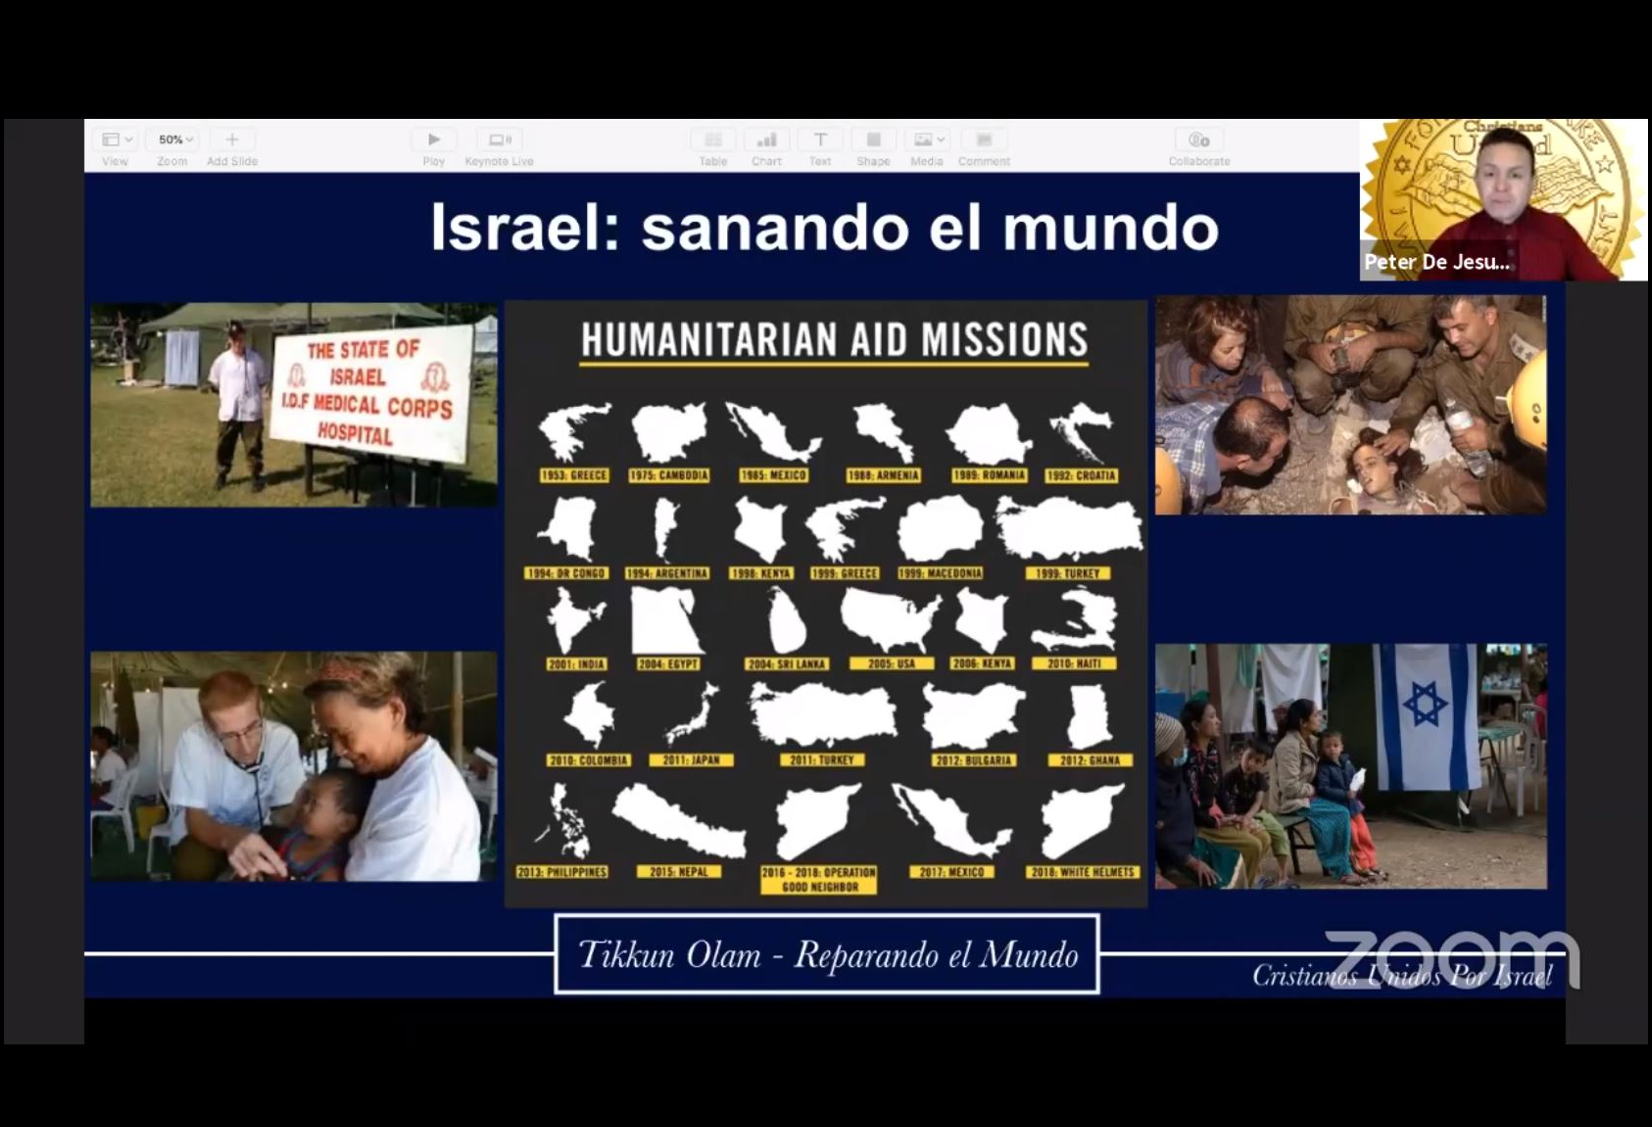 October 29 - Spanish Why Israel?